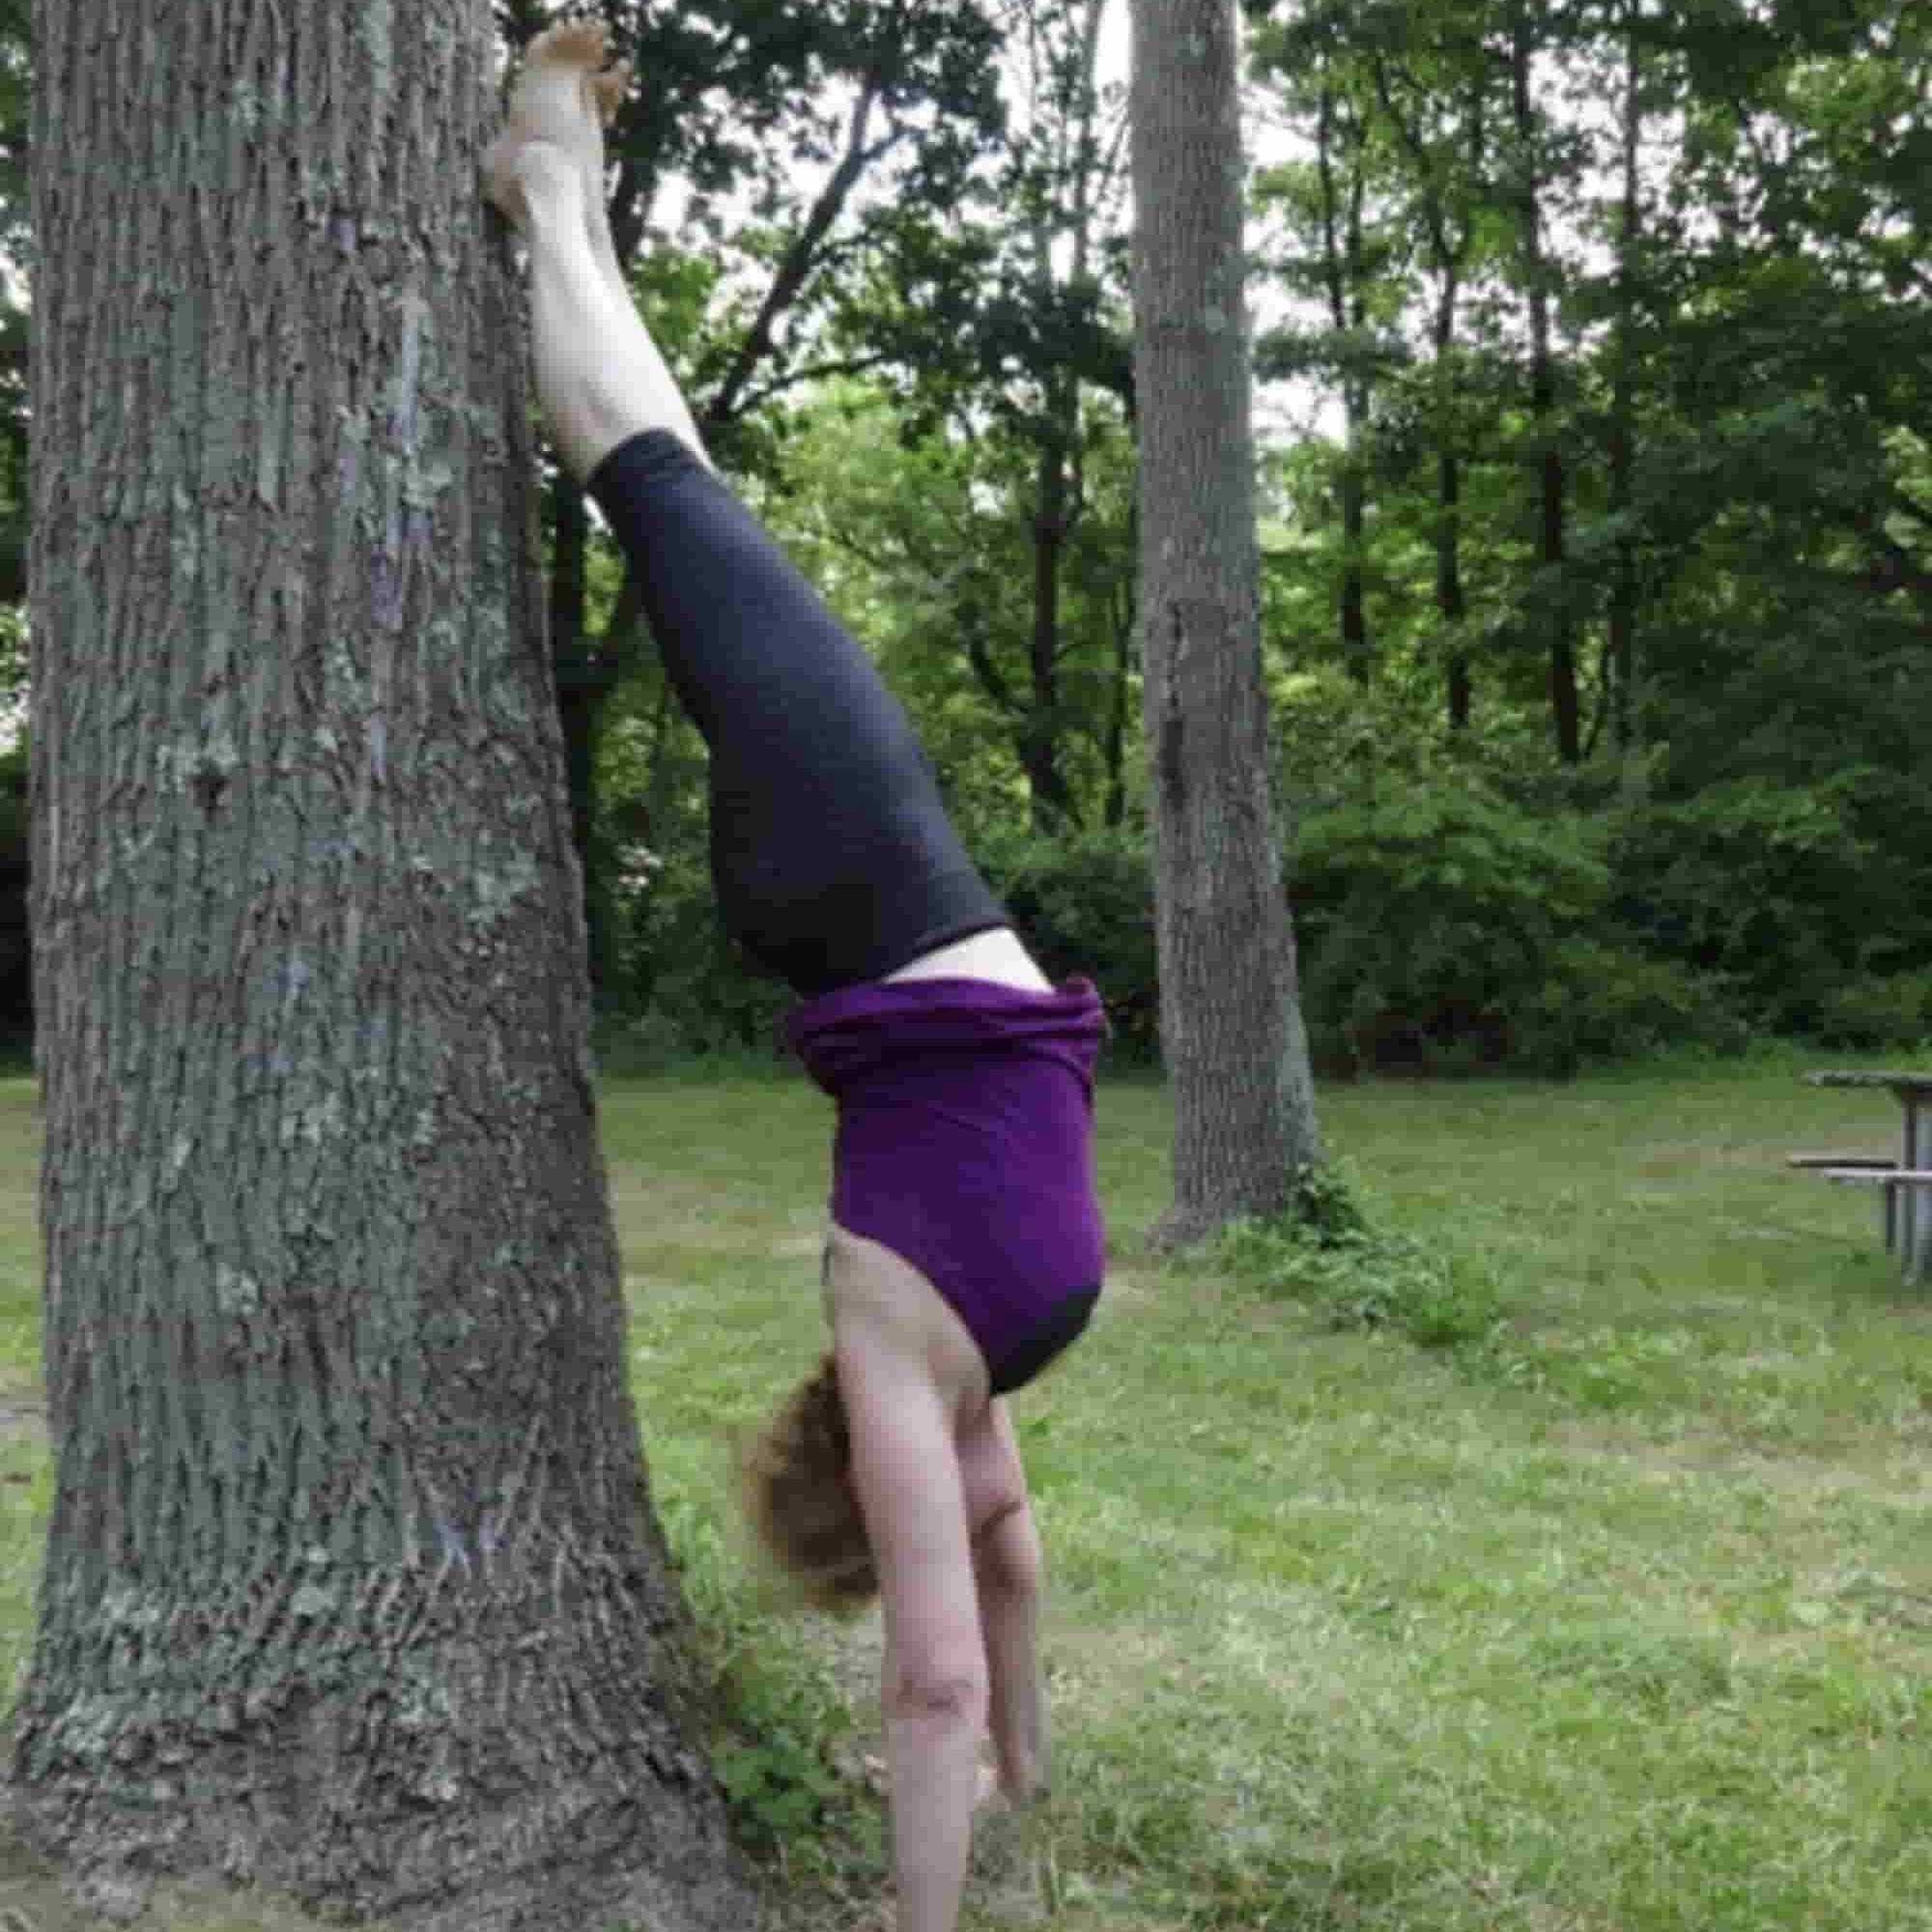 Woman in a purple yoga top and black yoga pants does a handstand against a tree in a green lawn